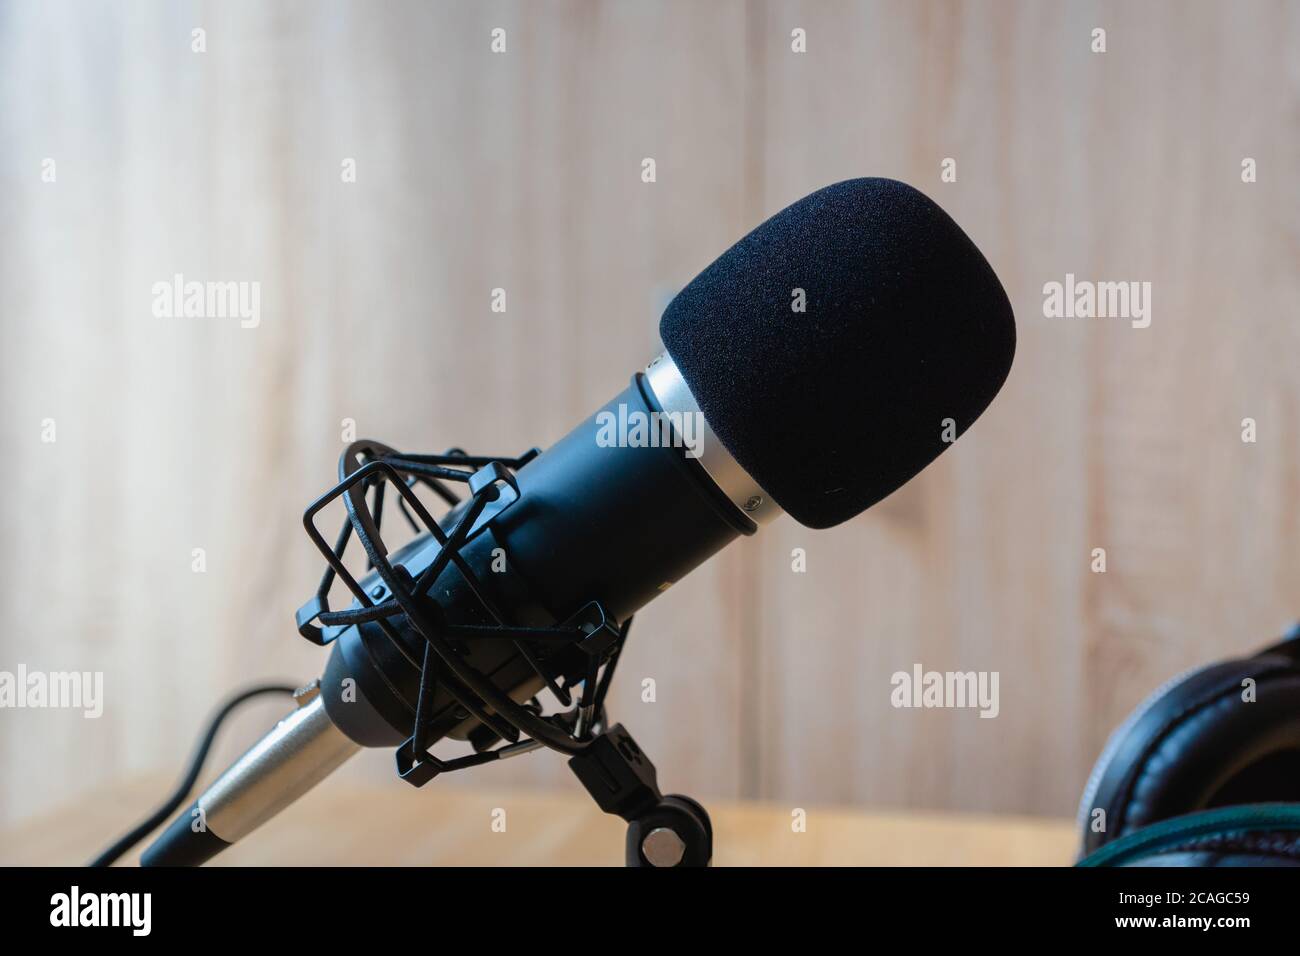 Microphone -  professional condenser microphone in a home studio for podcast, music production, voice over, recording Stock Photo